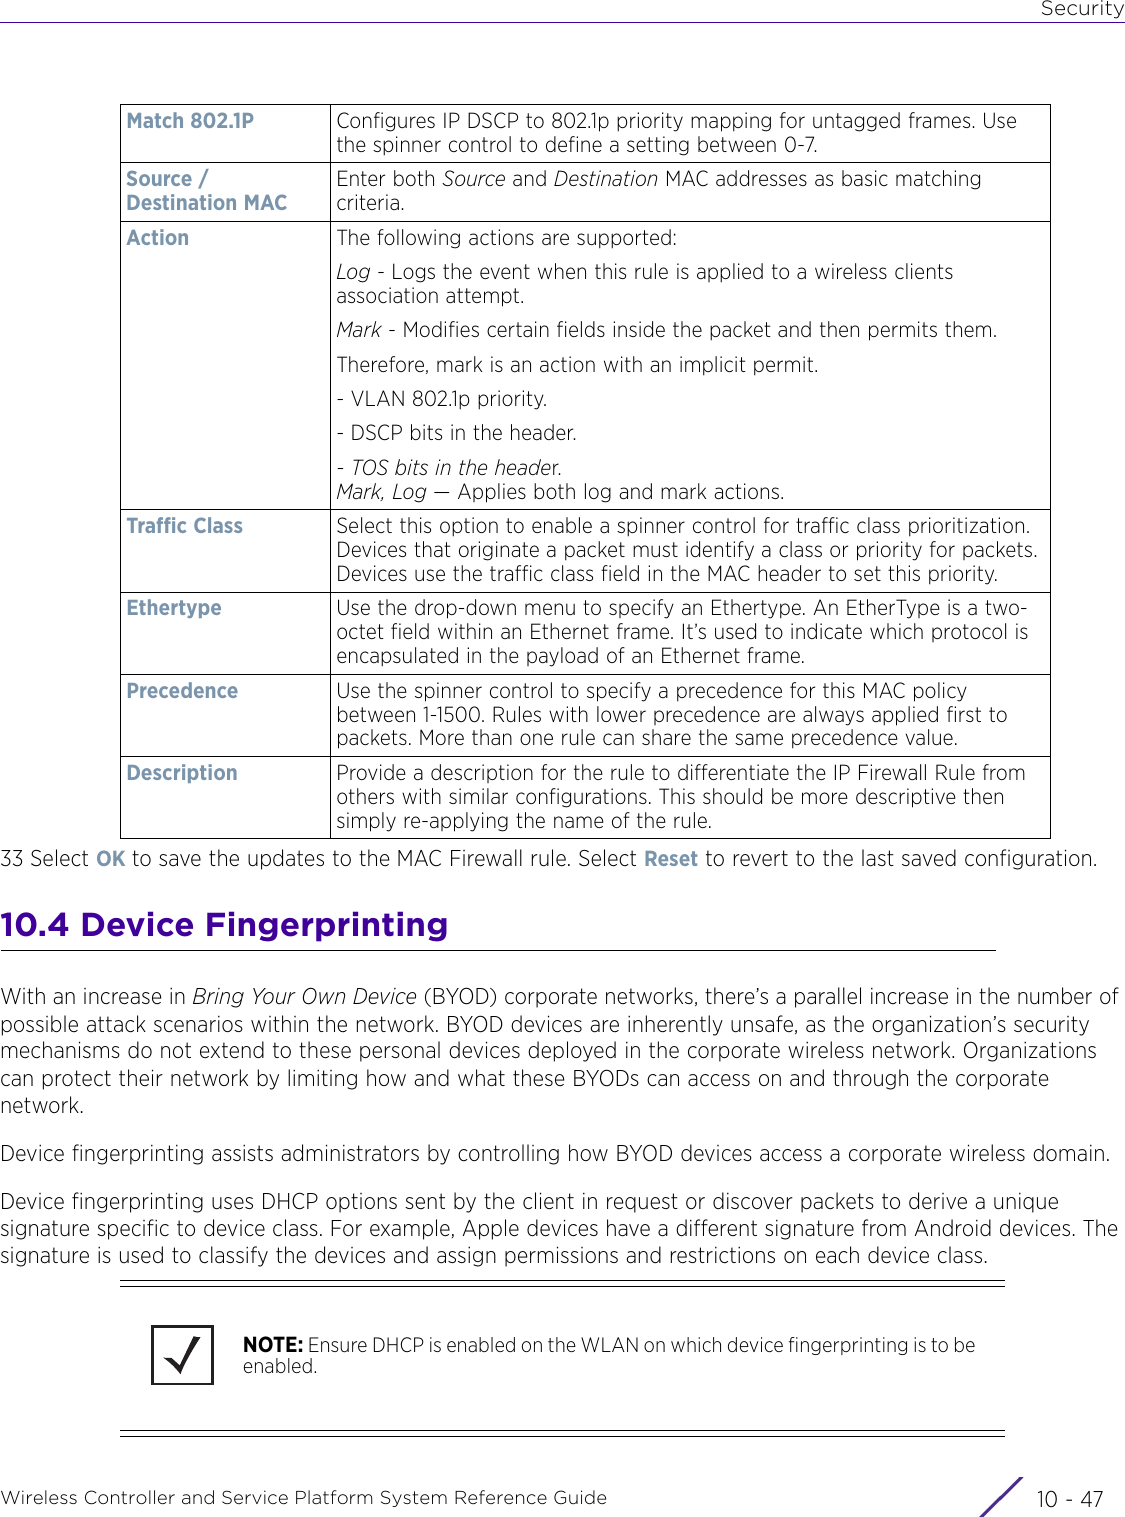 SecurityWireless Controller and Service Platform System Reference Guide 10 - 4733 Select OK to save the updates to the MAC Firewall rule. Select Reset to revert to the last saved configuration.10.4 Device FingerprintingWith an increase in Bring Your Own Device (BYOD) corporate networks, there’s a parallel increase in the number of possible attack scenarios within the network. BYOD devices are inherently unsafe, as the organization’s security mechanisms do not extend to these personal devices deployed in the corporate wireless network. Organizations can protect their network by limiting how and what these BYODs can access on and through the corporate network.Device fingerprinting assists administrators by controlling how BYOD devices access a corporate wireless domain. Device fingerprinting uses DHCP options sent by the client in request or discover packets to derive a unique signature specific to device class. For example, Apple devices have a different signature from Android devices. The signature is used to classify the devices and assign permissions and restrictions on each device class.Match 802.1P Configures IP DSCP to 802.1p priority mapping for untagged frames. Use the spinner control to define a setting between 0-7.Source / Destination MACEnter both Source and Destination MAC addresses as basic matching criteria. Action The following actions are supported:Log - Logs the event when this rule is applied to a wireless clients association attempt.Mark - Modifies certain fields inside the packet and then permits them.Therefore, mark is an action with an implicit permit.- VLAN 802.1p priority.- DSCP bits in the header.- TOS bits in the header.Mark, Log — Applies both log and mark actions.Traffic Class Select this option to enable a spinner control for traffic class prioritization. Devices that originate a packet must identify a class or priority for packets. Devices use the traffic class field in the MAC header to set this priority.Ethertype Use the drop-down menu to specify an Ethertype. An EtherType is a two-octet field within an Ethernet frame. It’s used to indicate which protocol is encapsulated in the payload of an Ethernet frame.Precedence Use the spinner control to specify a precedence for this MAC policy between 1-1500. Rules with lower precedence are always applied first to packets. More than one rule can share the same precedence value.Description Provide a description for the rule to differentiate the IP Firewall Rule from others with similar configurations. This should be more descriptive then simply re-applying the name of the rule.NOTE: Ensure DHCP is enabled on the WLAN on which device fingerprinting is to be enabled.